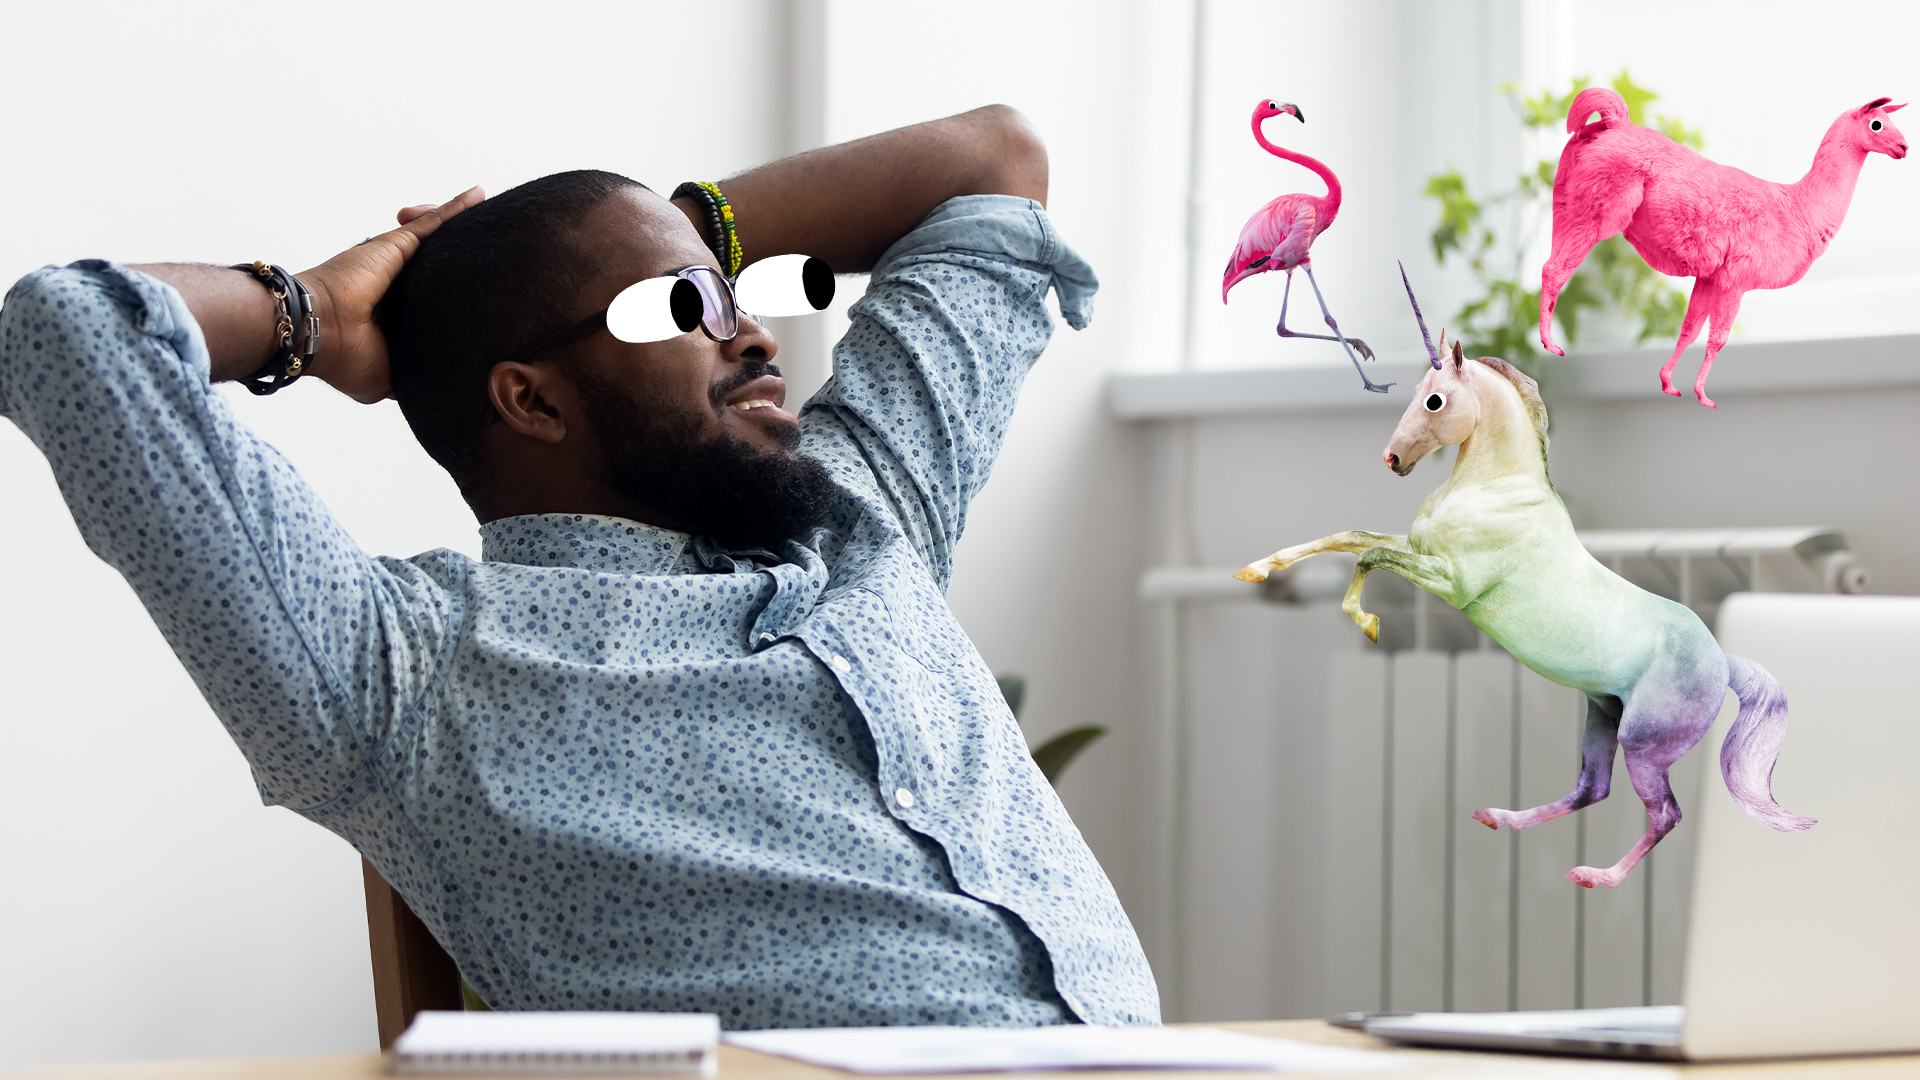 A man relaxes while surrounded by a unicorn, llama and flamingo